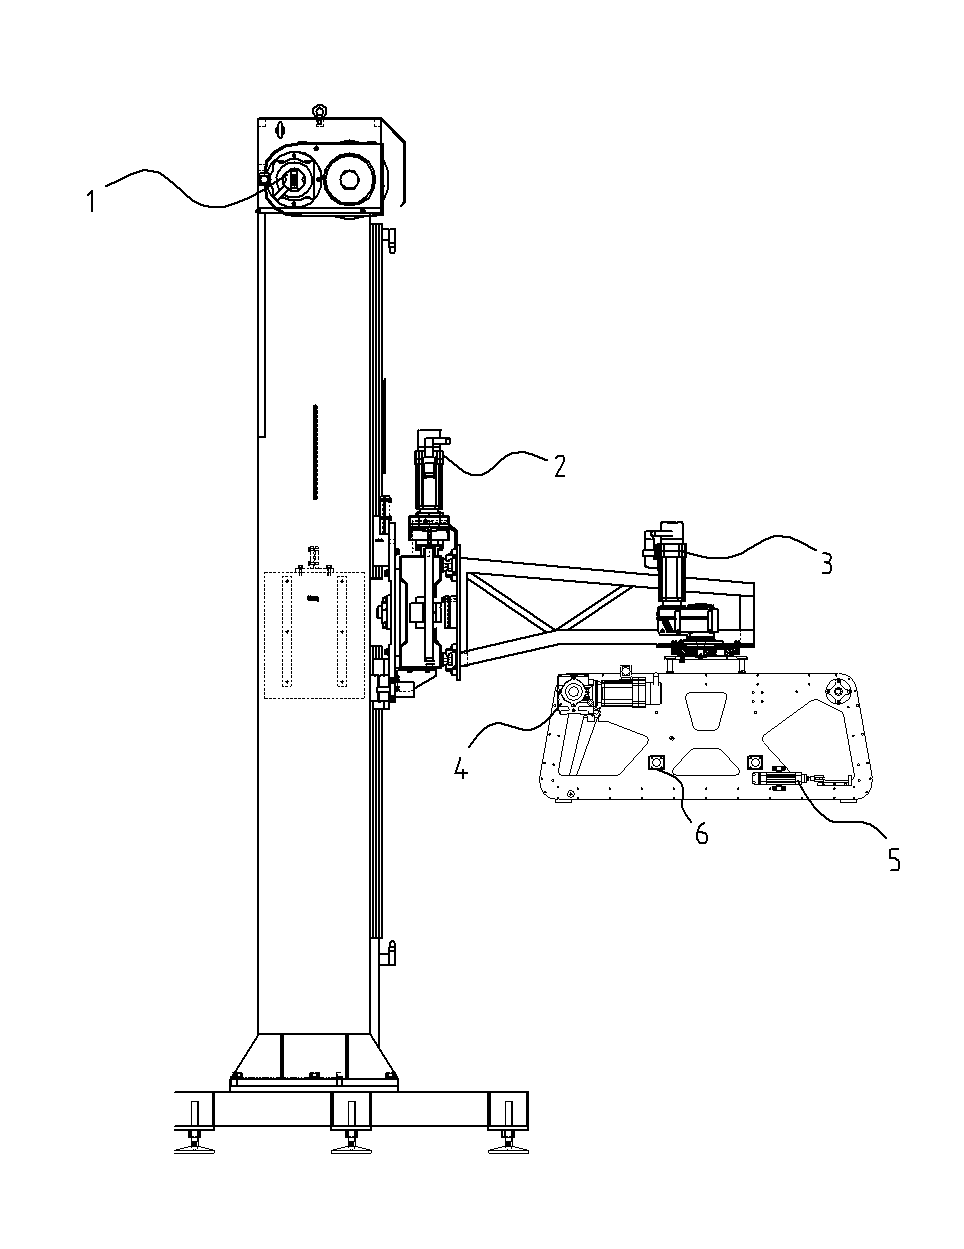 Single-arm palletizing robot control system and method